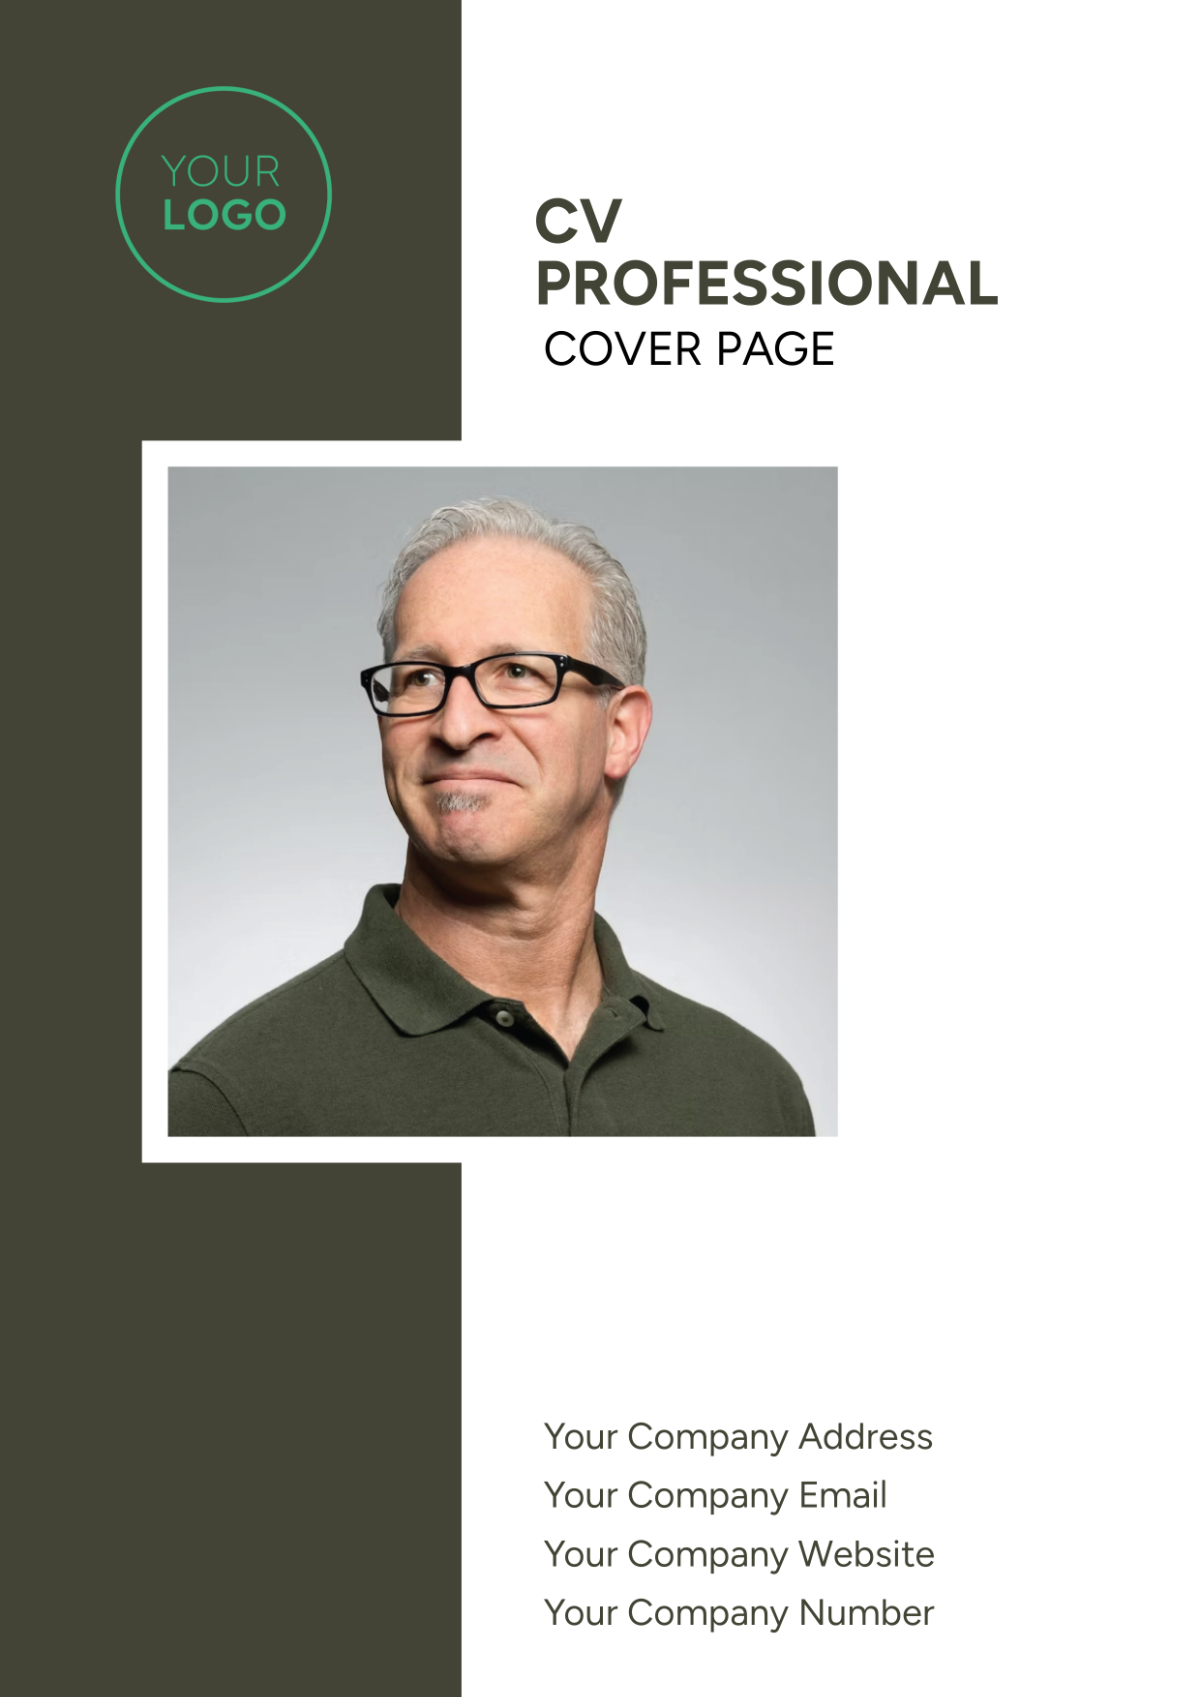 CV Professional Cover Page